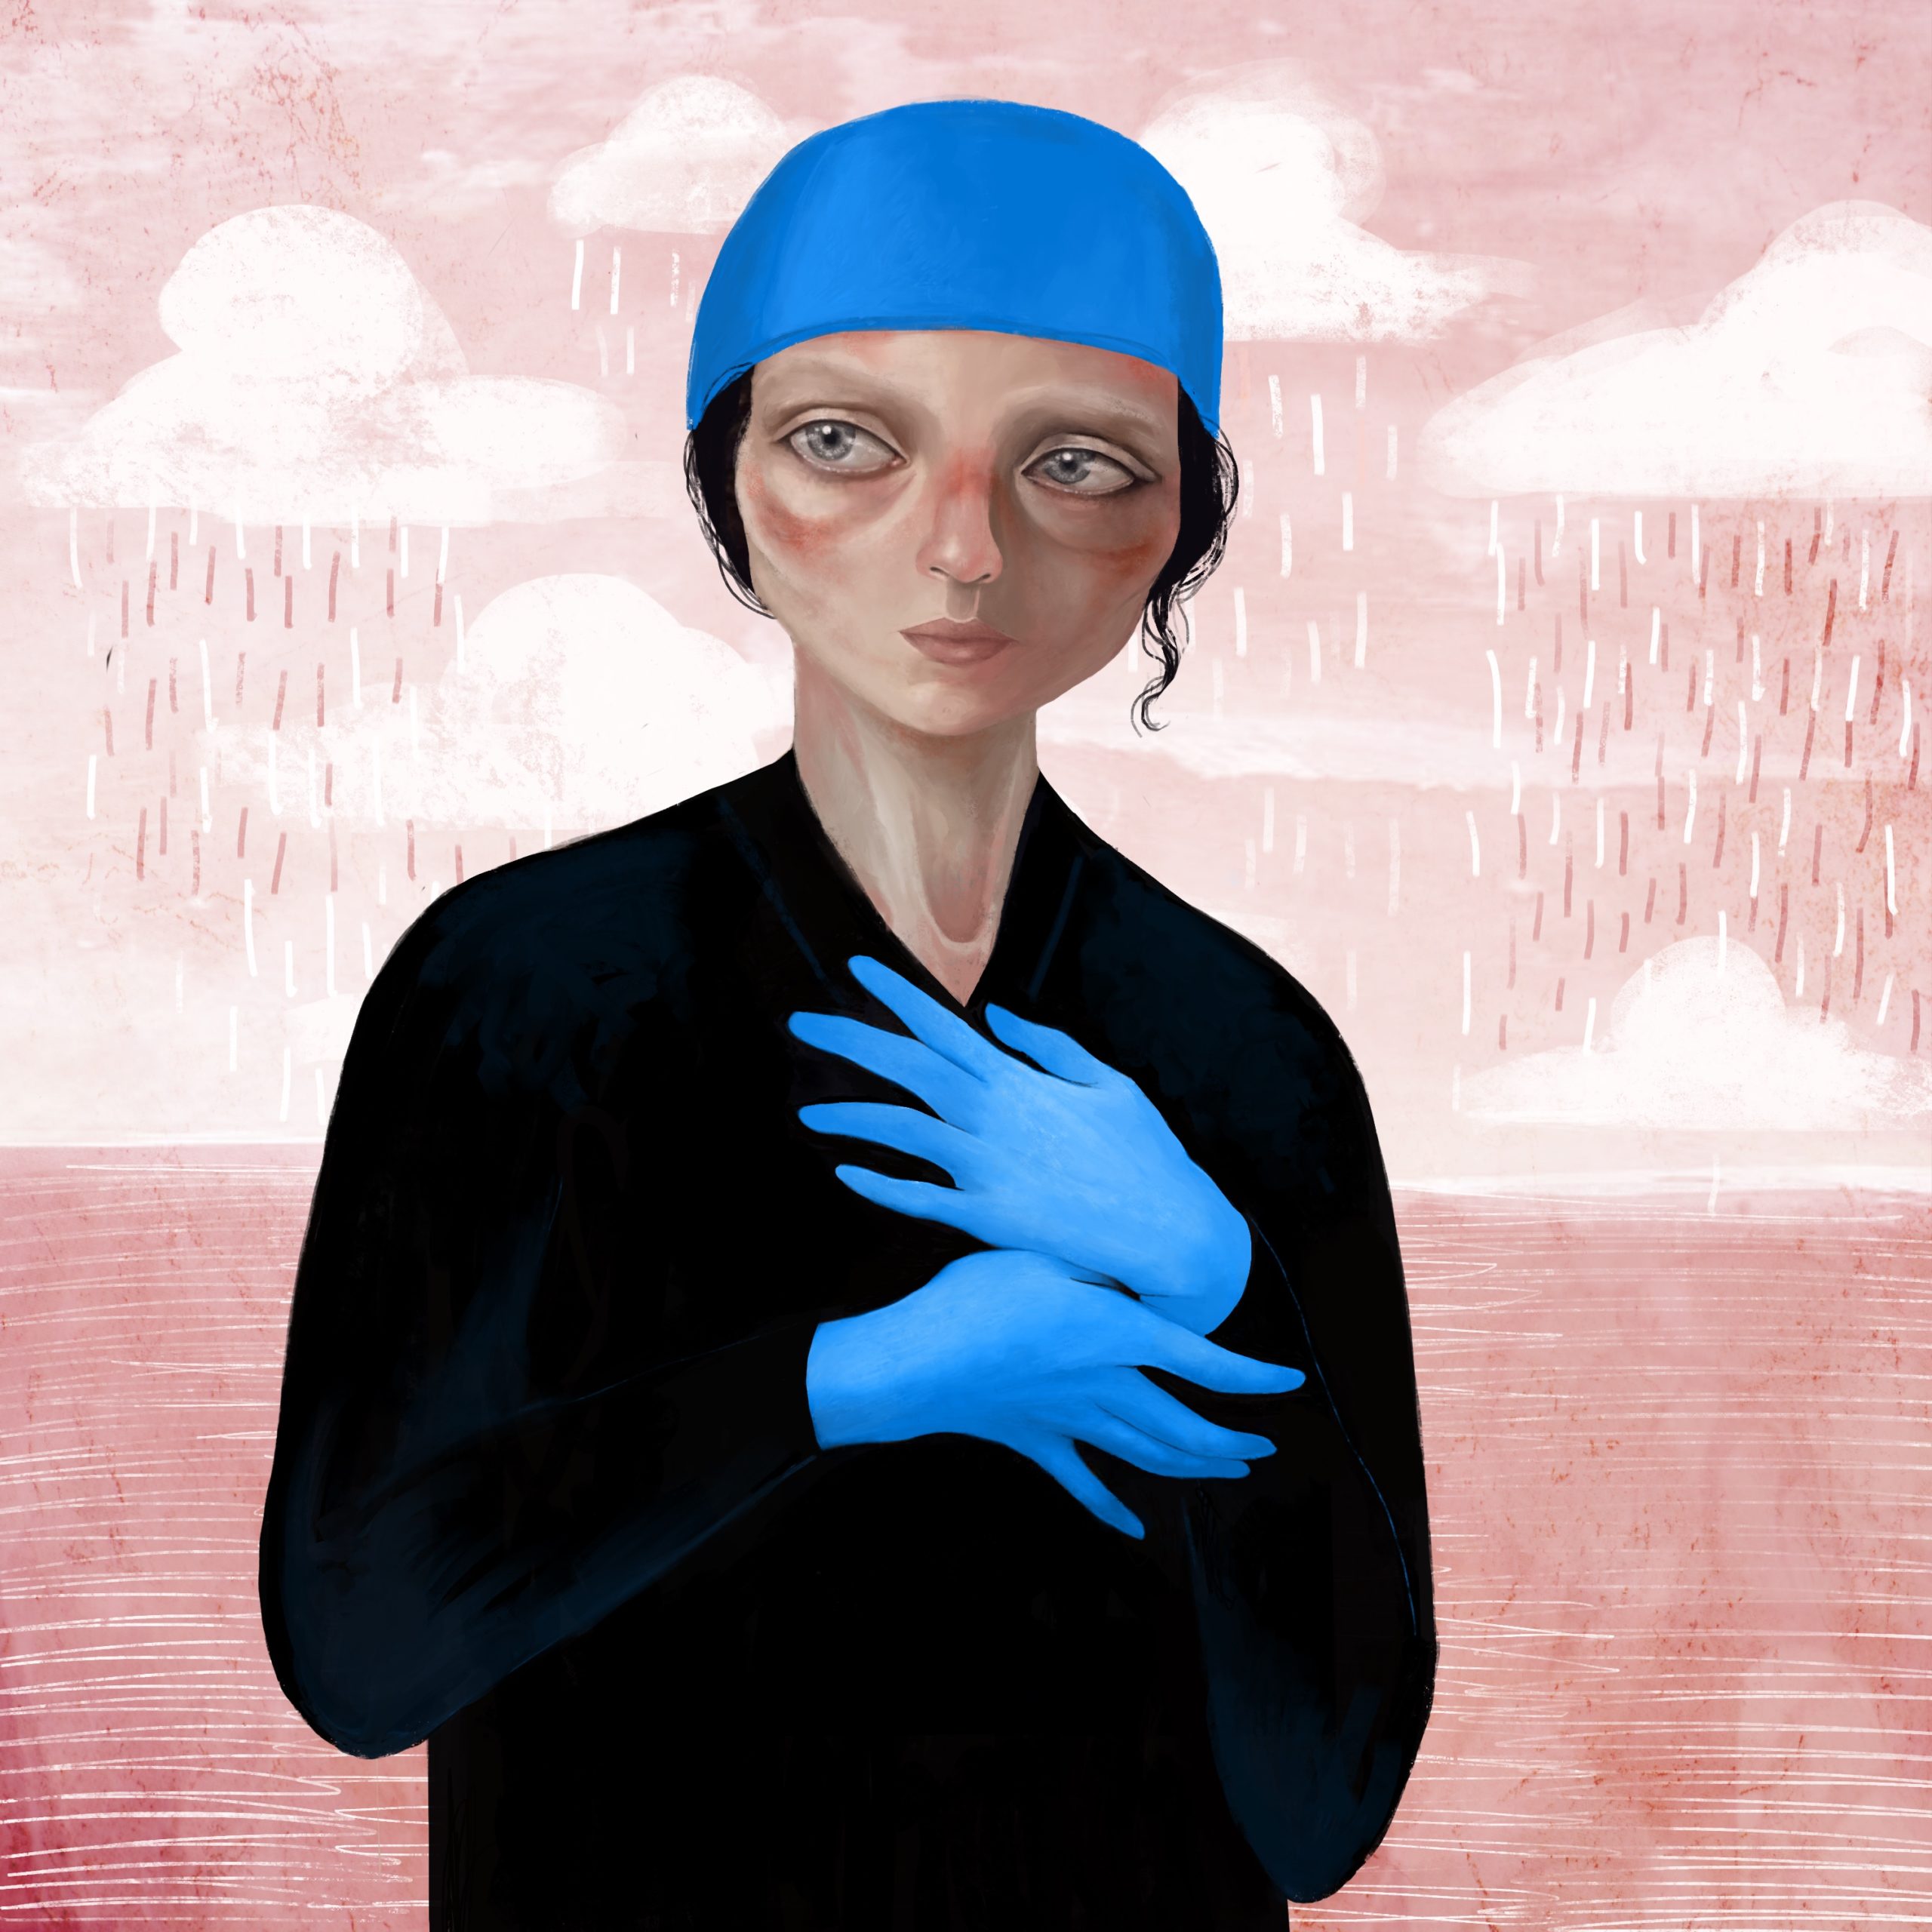 Her pristine blue surgical gloves and cap contrasted the red marks bridging her nose and cheeks. She was raw, or at least her face was, from the rub of a mask worn for too many hours, over too many days. Her neutral expression of the professional detachment gazed distantly. She clutched her hands protectively to her chest, her right hand appearing to take the radial wrist pulse of her left hand, which was sensing her heart. Her black scrubs, darkness duds contrasted her rosy surroundings. She embodies the paradoxical label of hero.